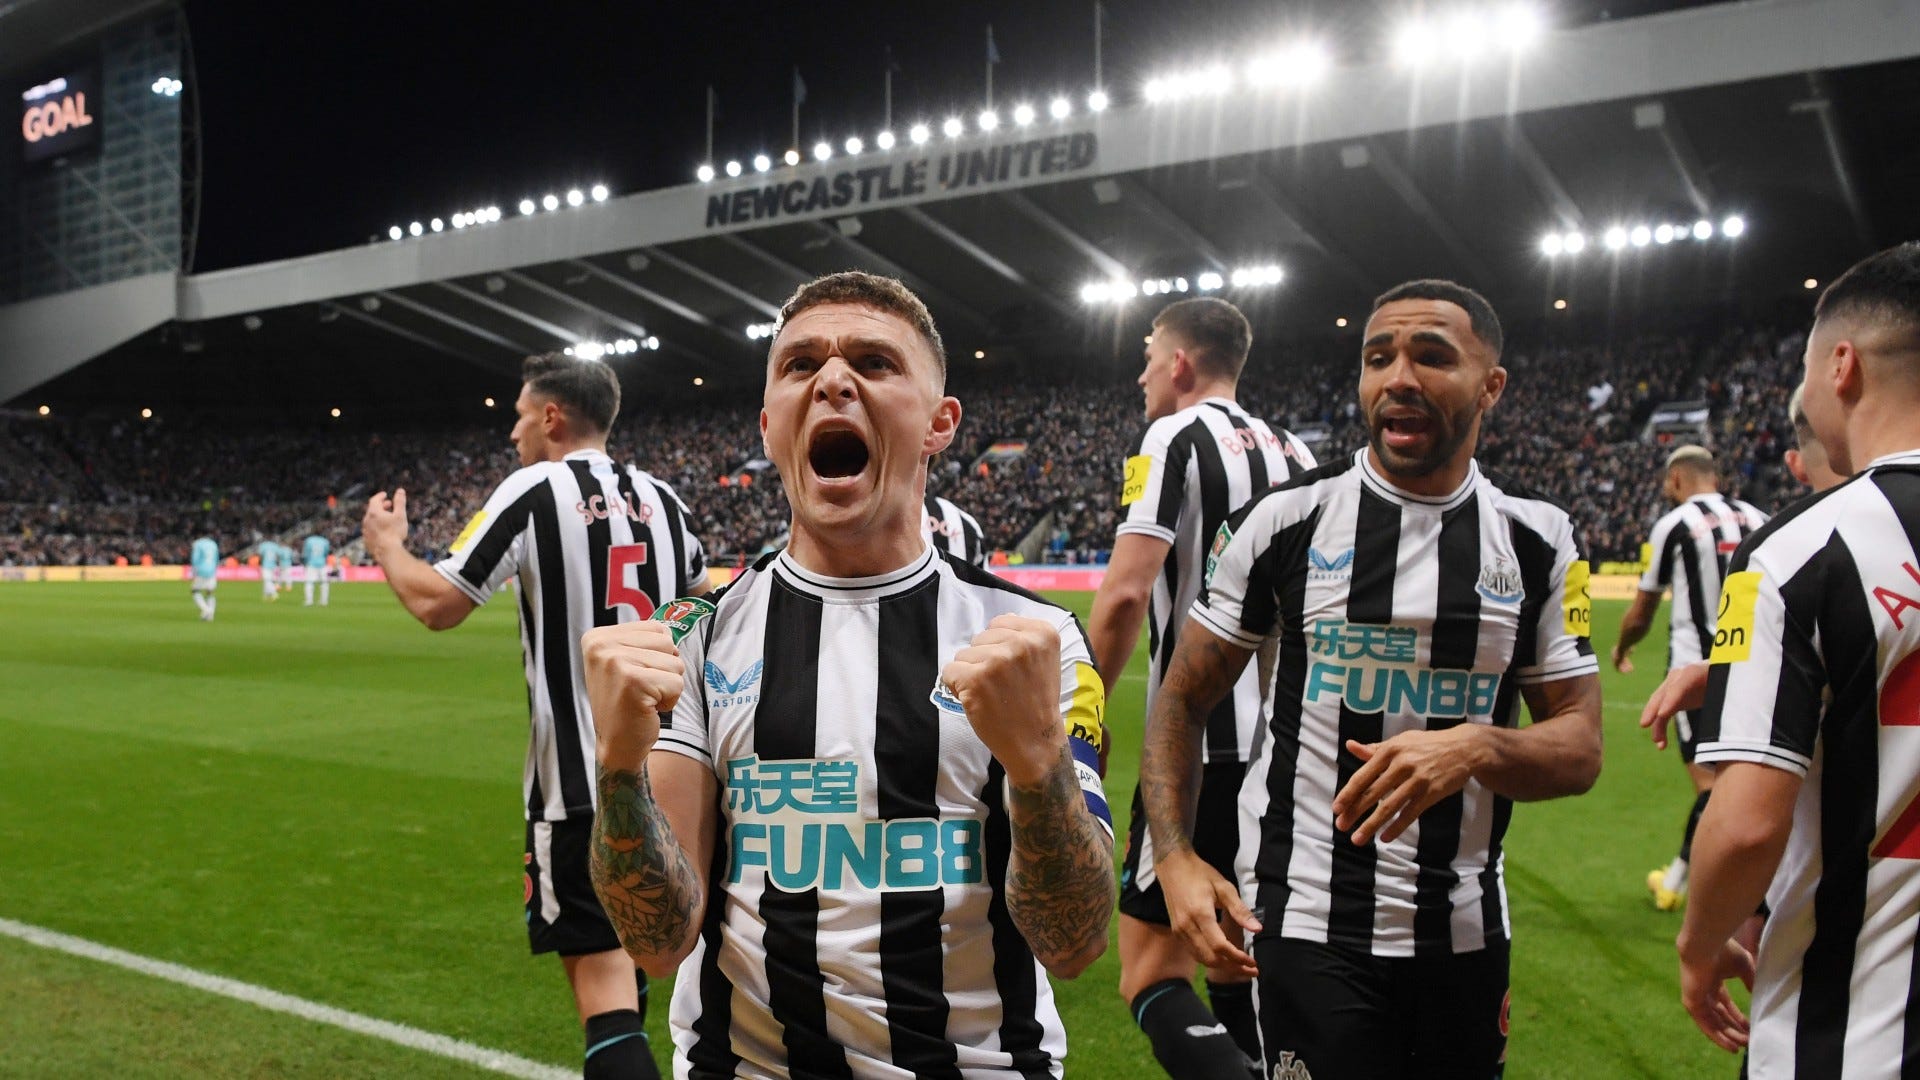 Bournemouth vs Newcastle United Live stream, TV channel, kick-off time and where to watch Goal